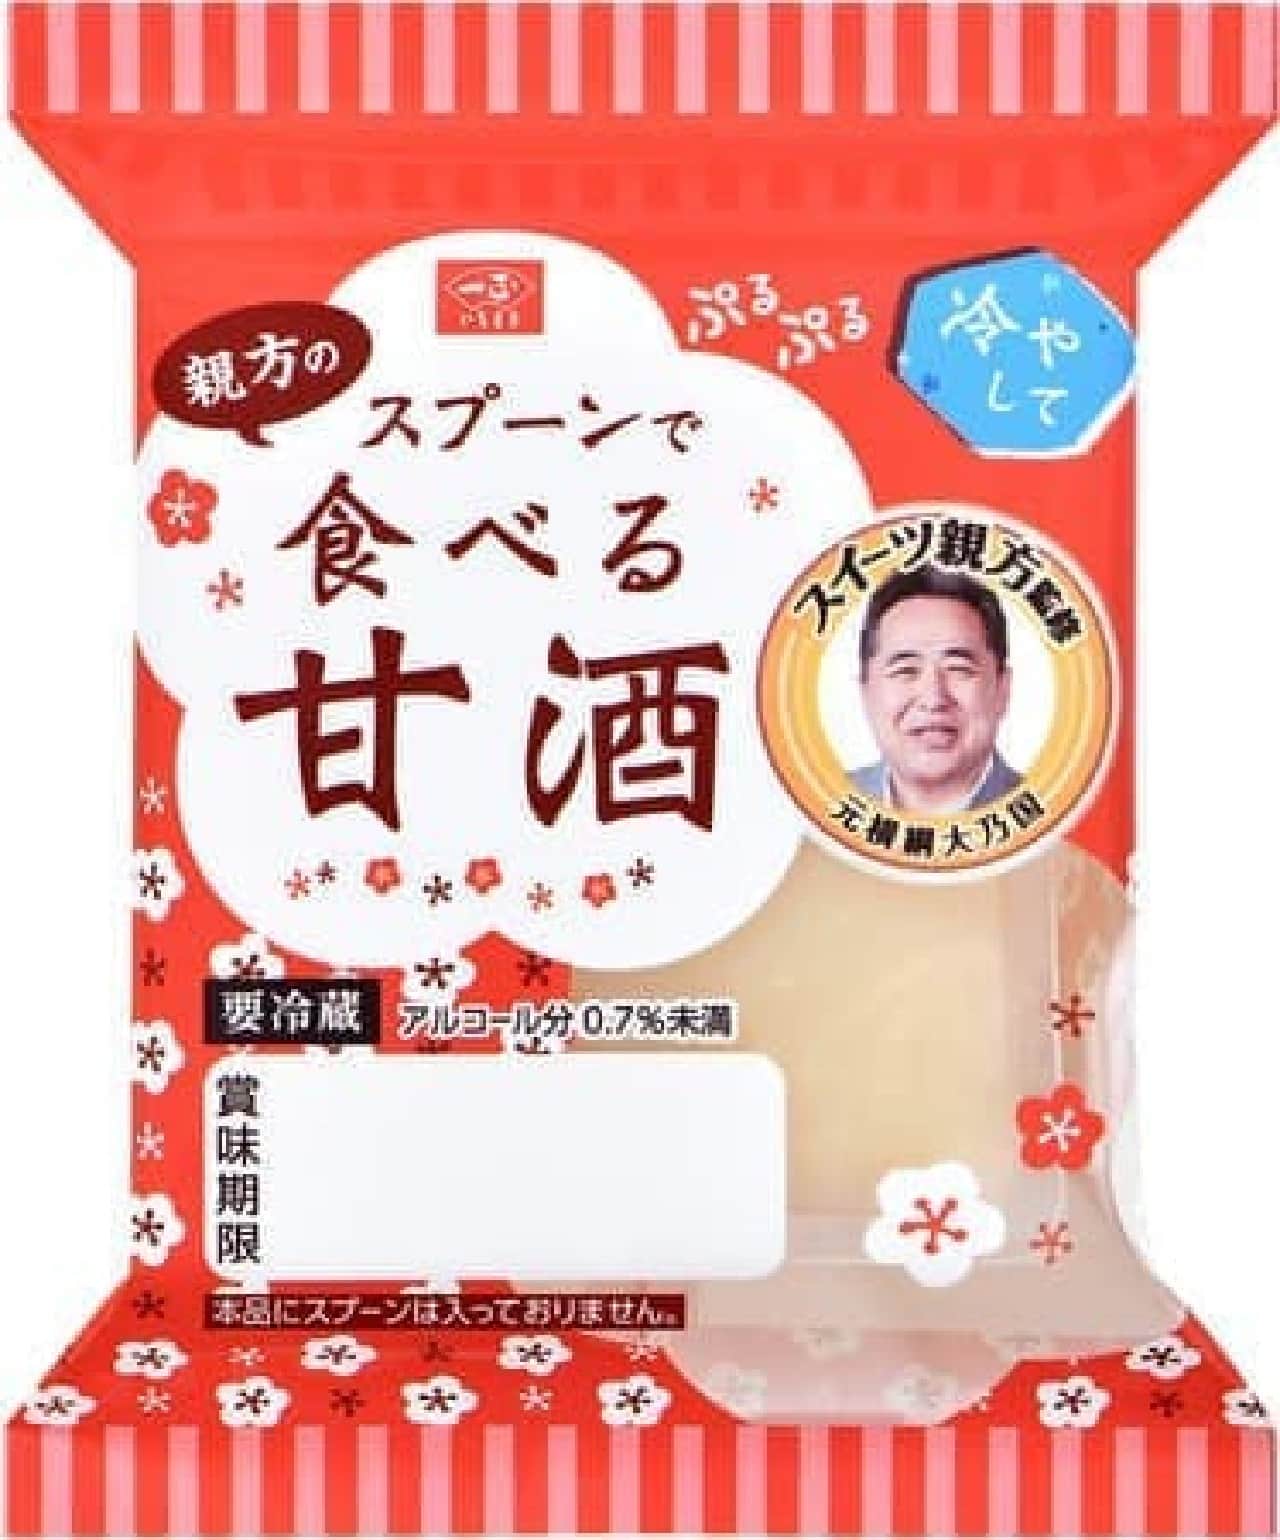 Ichimasa Kamo "Sweets supervised by the master, amazake eaten with a spoon"